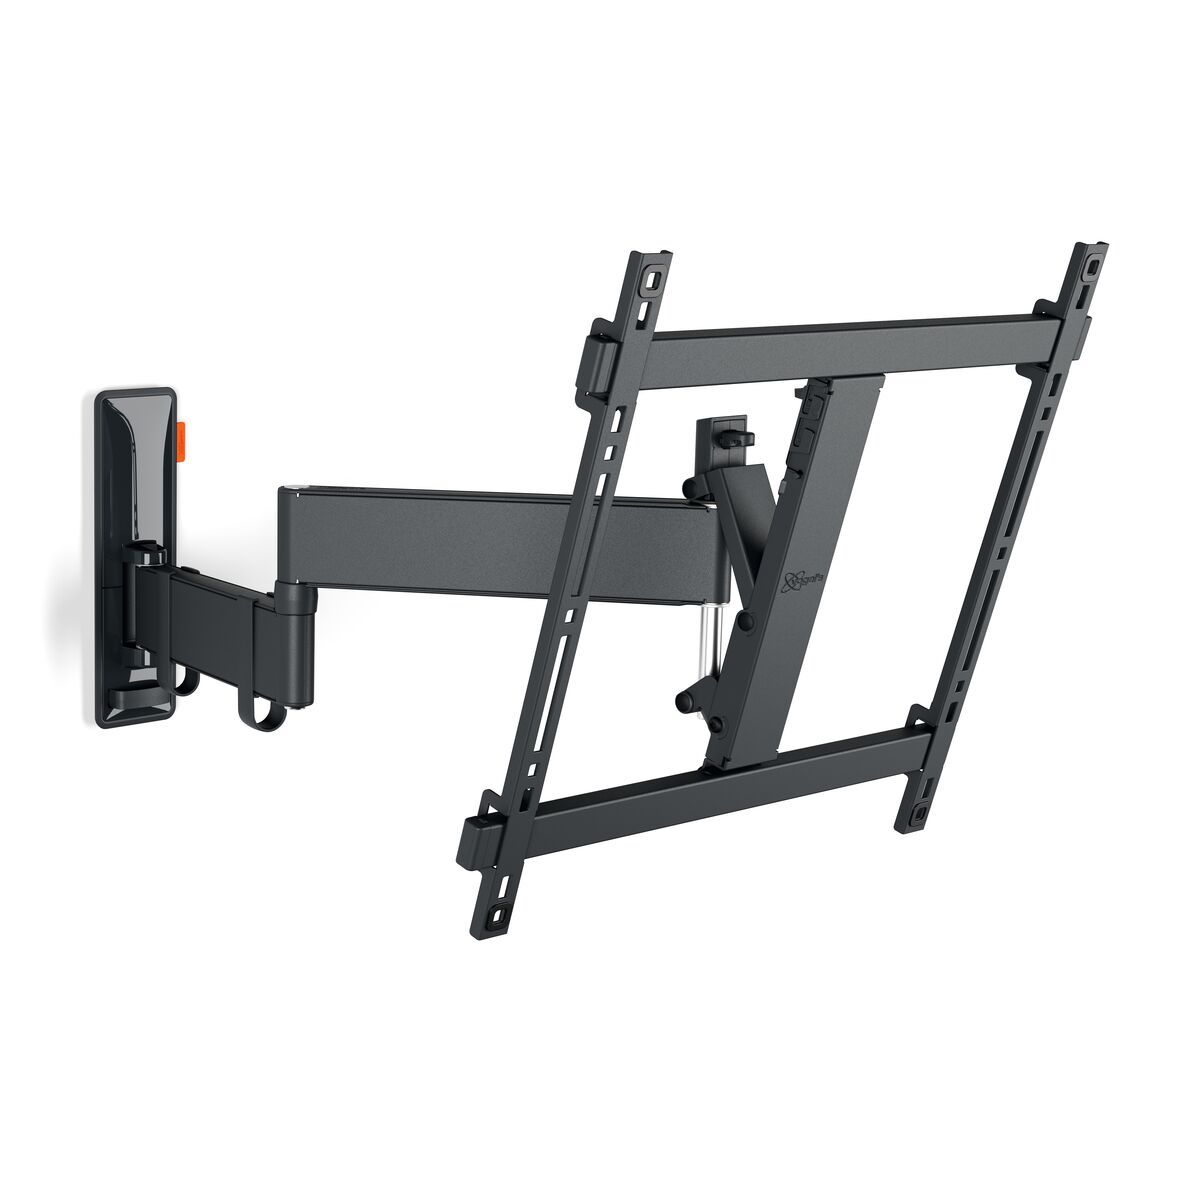 Vogel's TVM 3445 Full-Motion TV Wall Mount (black) - Suitable for 32 up to 65 inch TVs - Full motion (up to 180°) swivel - Tilt up to 20° - Product